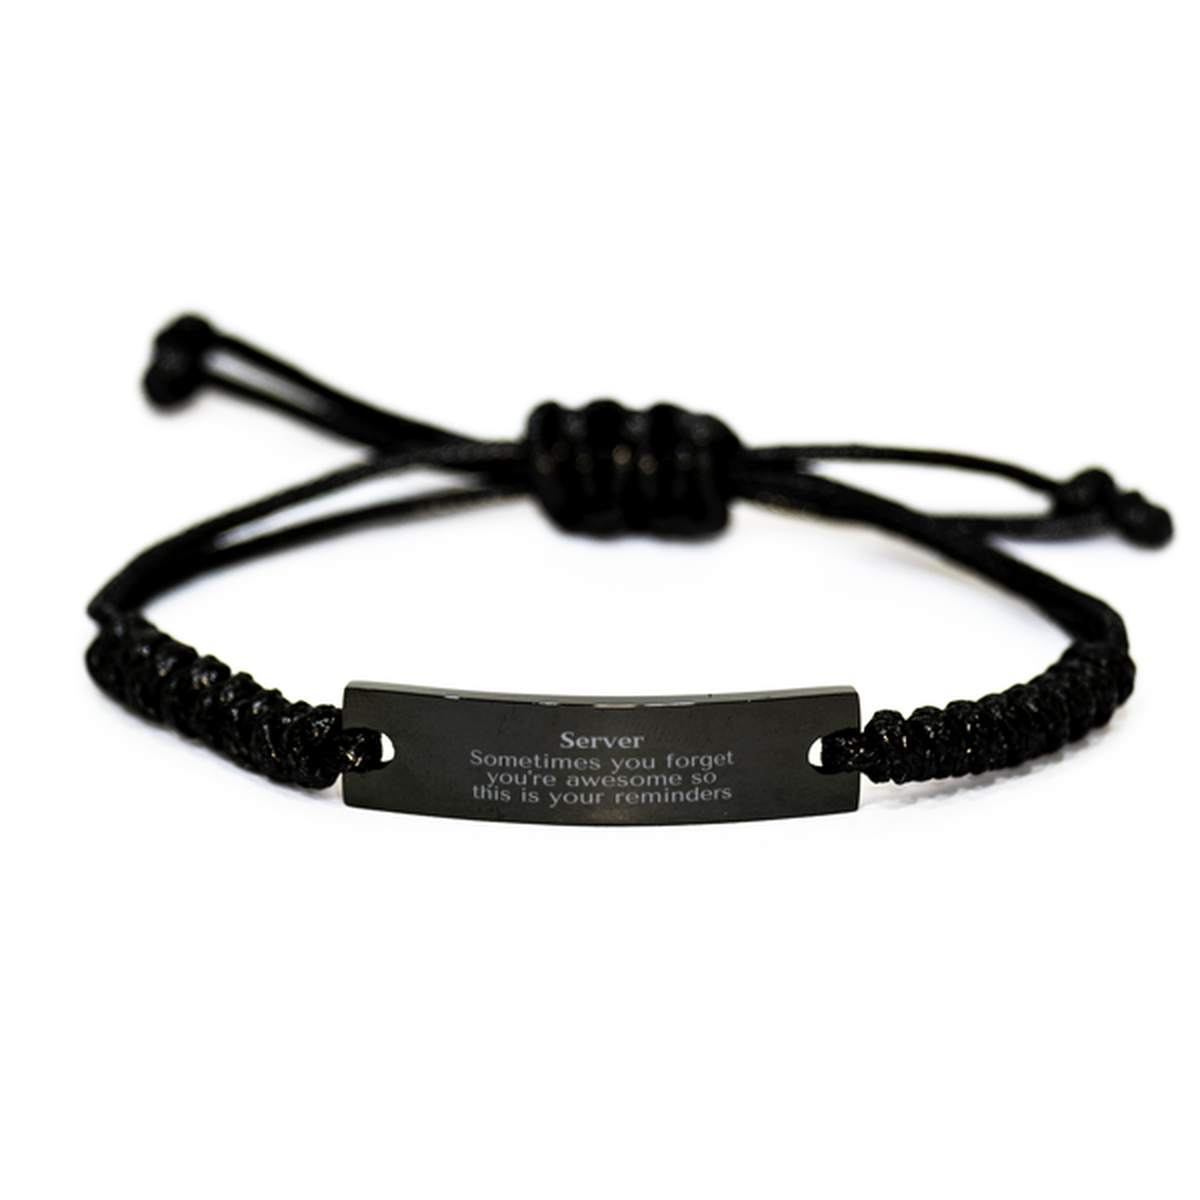 Sentimental Server Black Rope Bracelet, Server Sometimes you forget you're awesome so this is your reminders, Graduation Christmas Birthday Gifts for Server, Men, Women, Coworkers